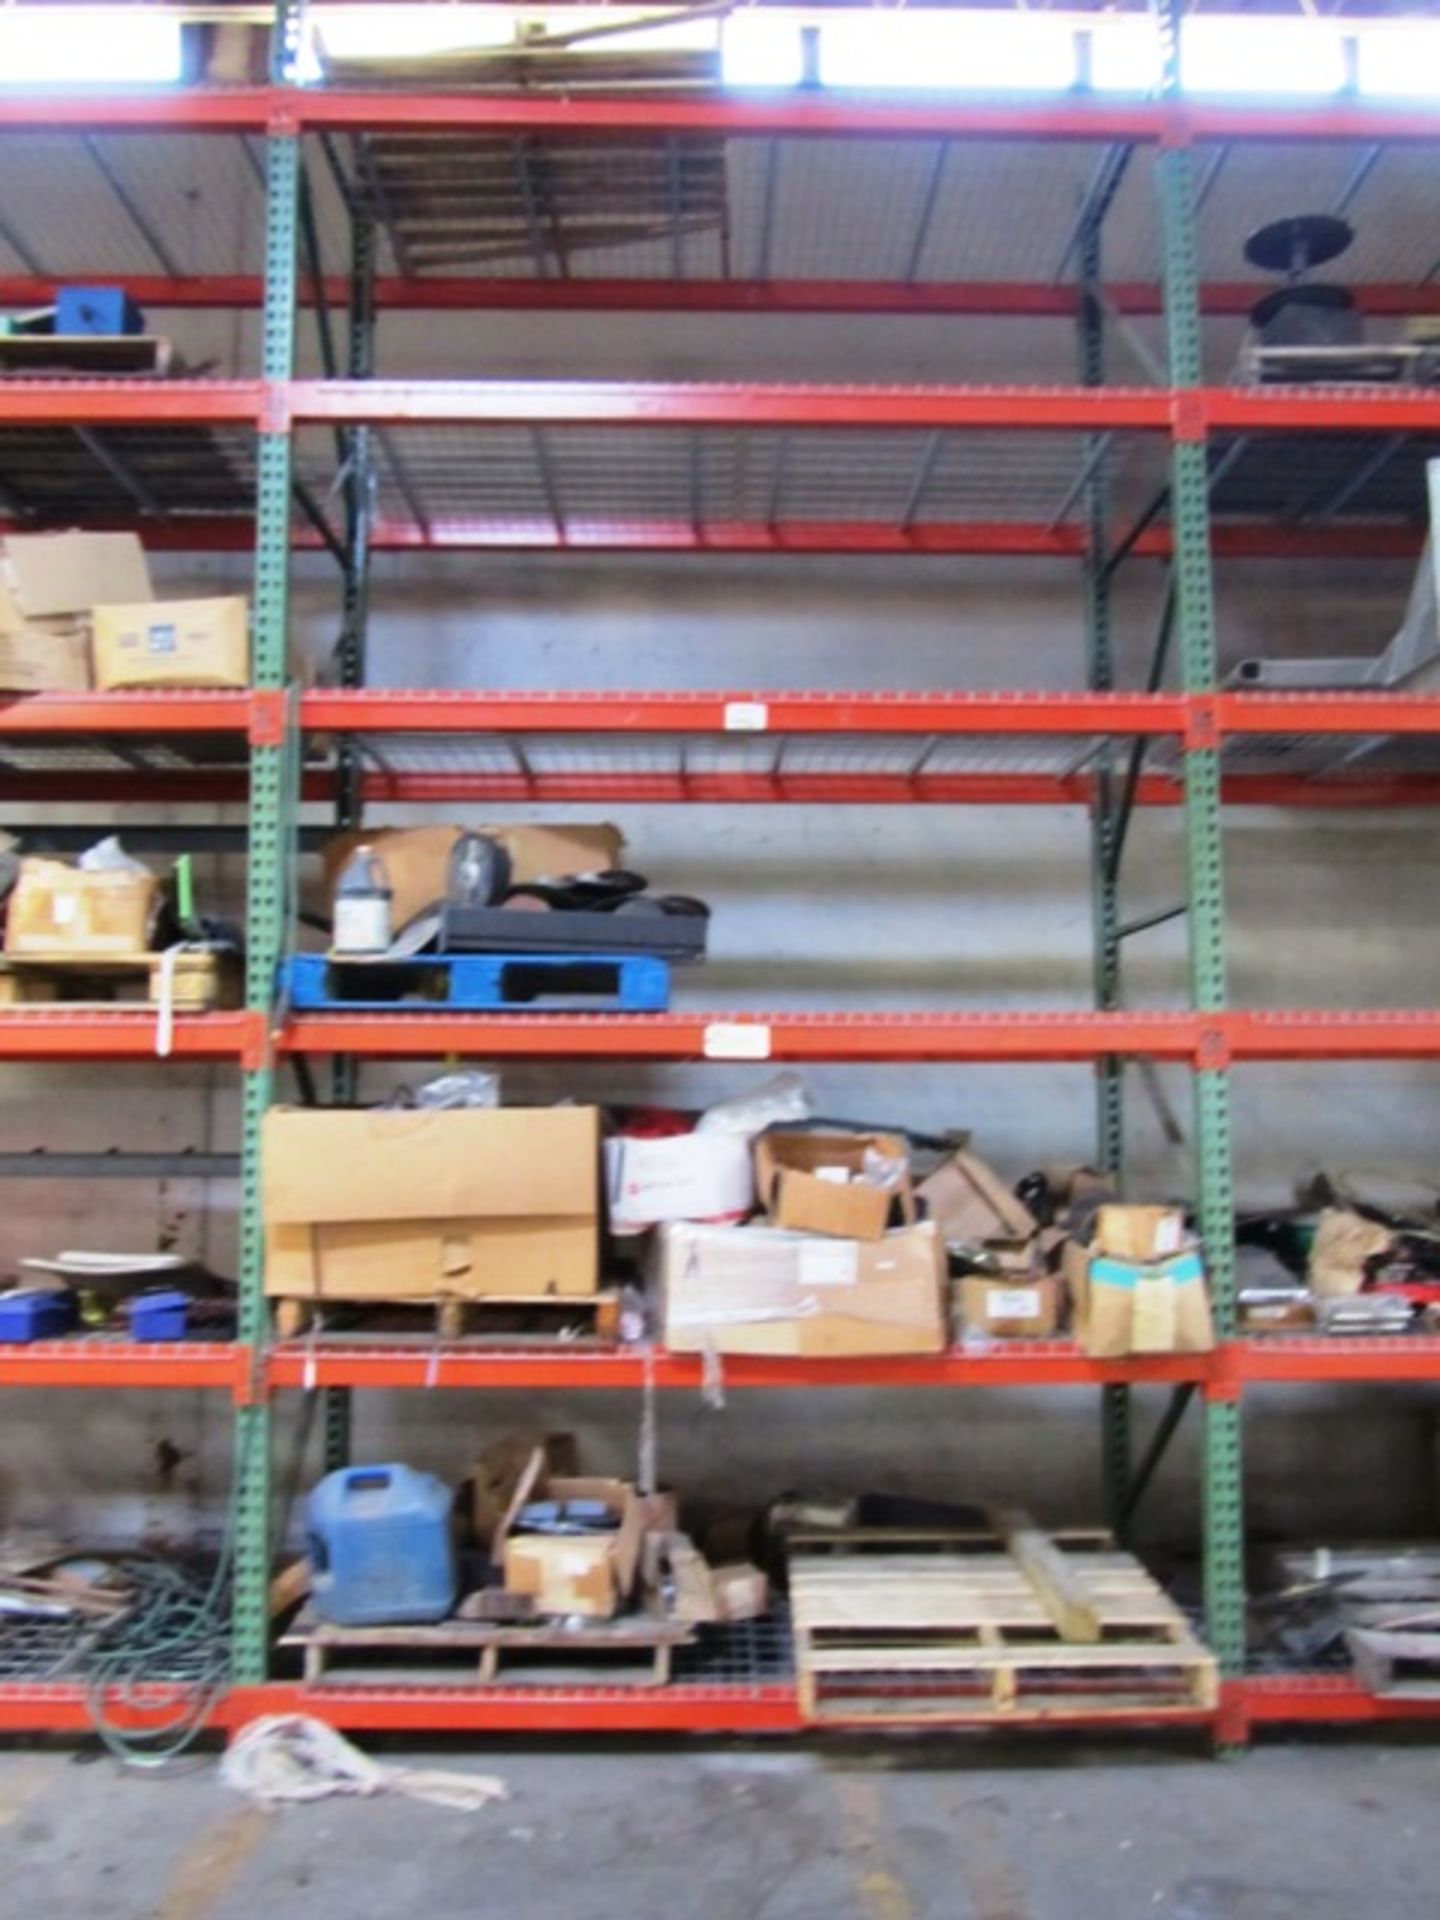 Contents of 3 Vertical Sections Pallet Racking consisting of Hose, Grinding Wheels, Etc.